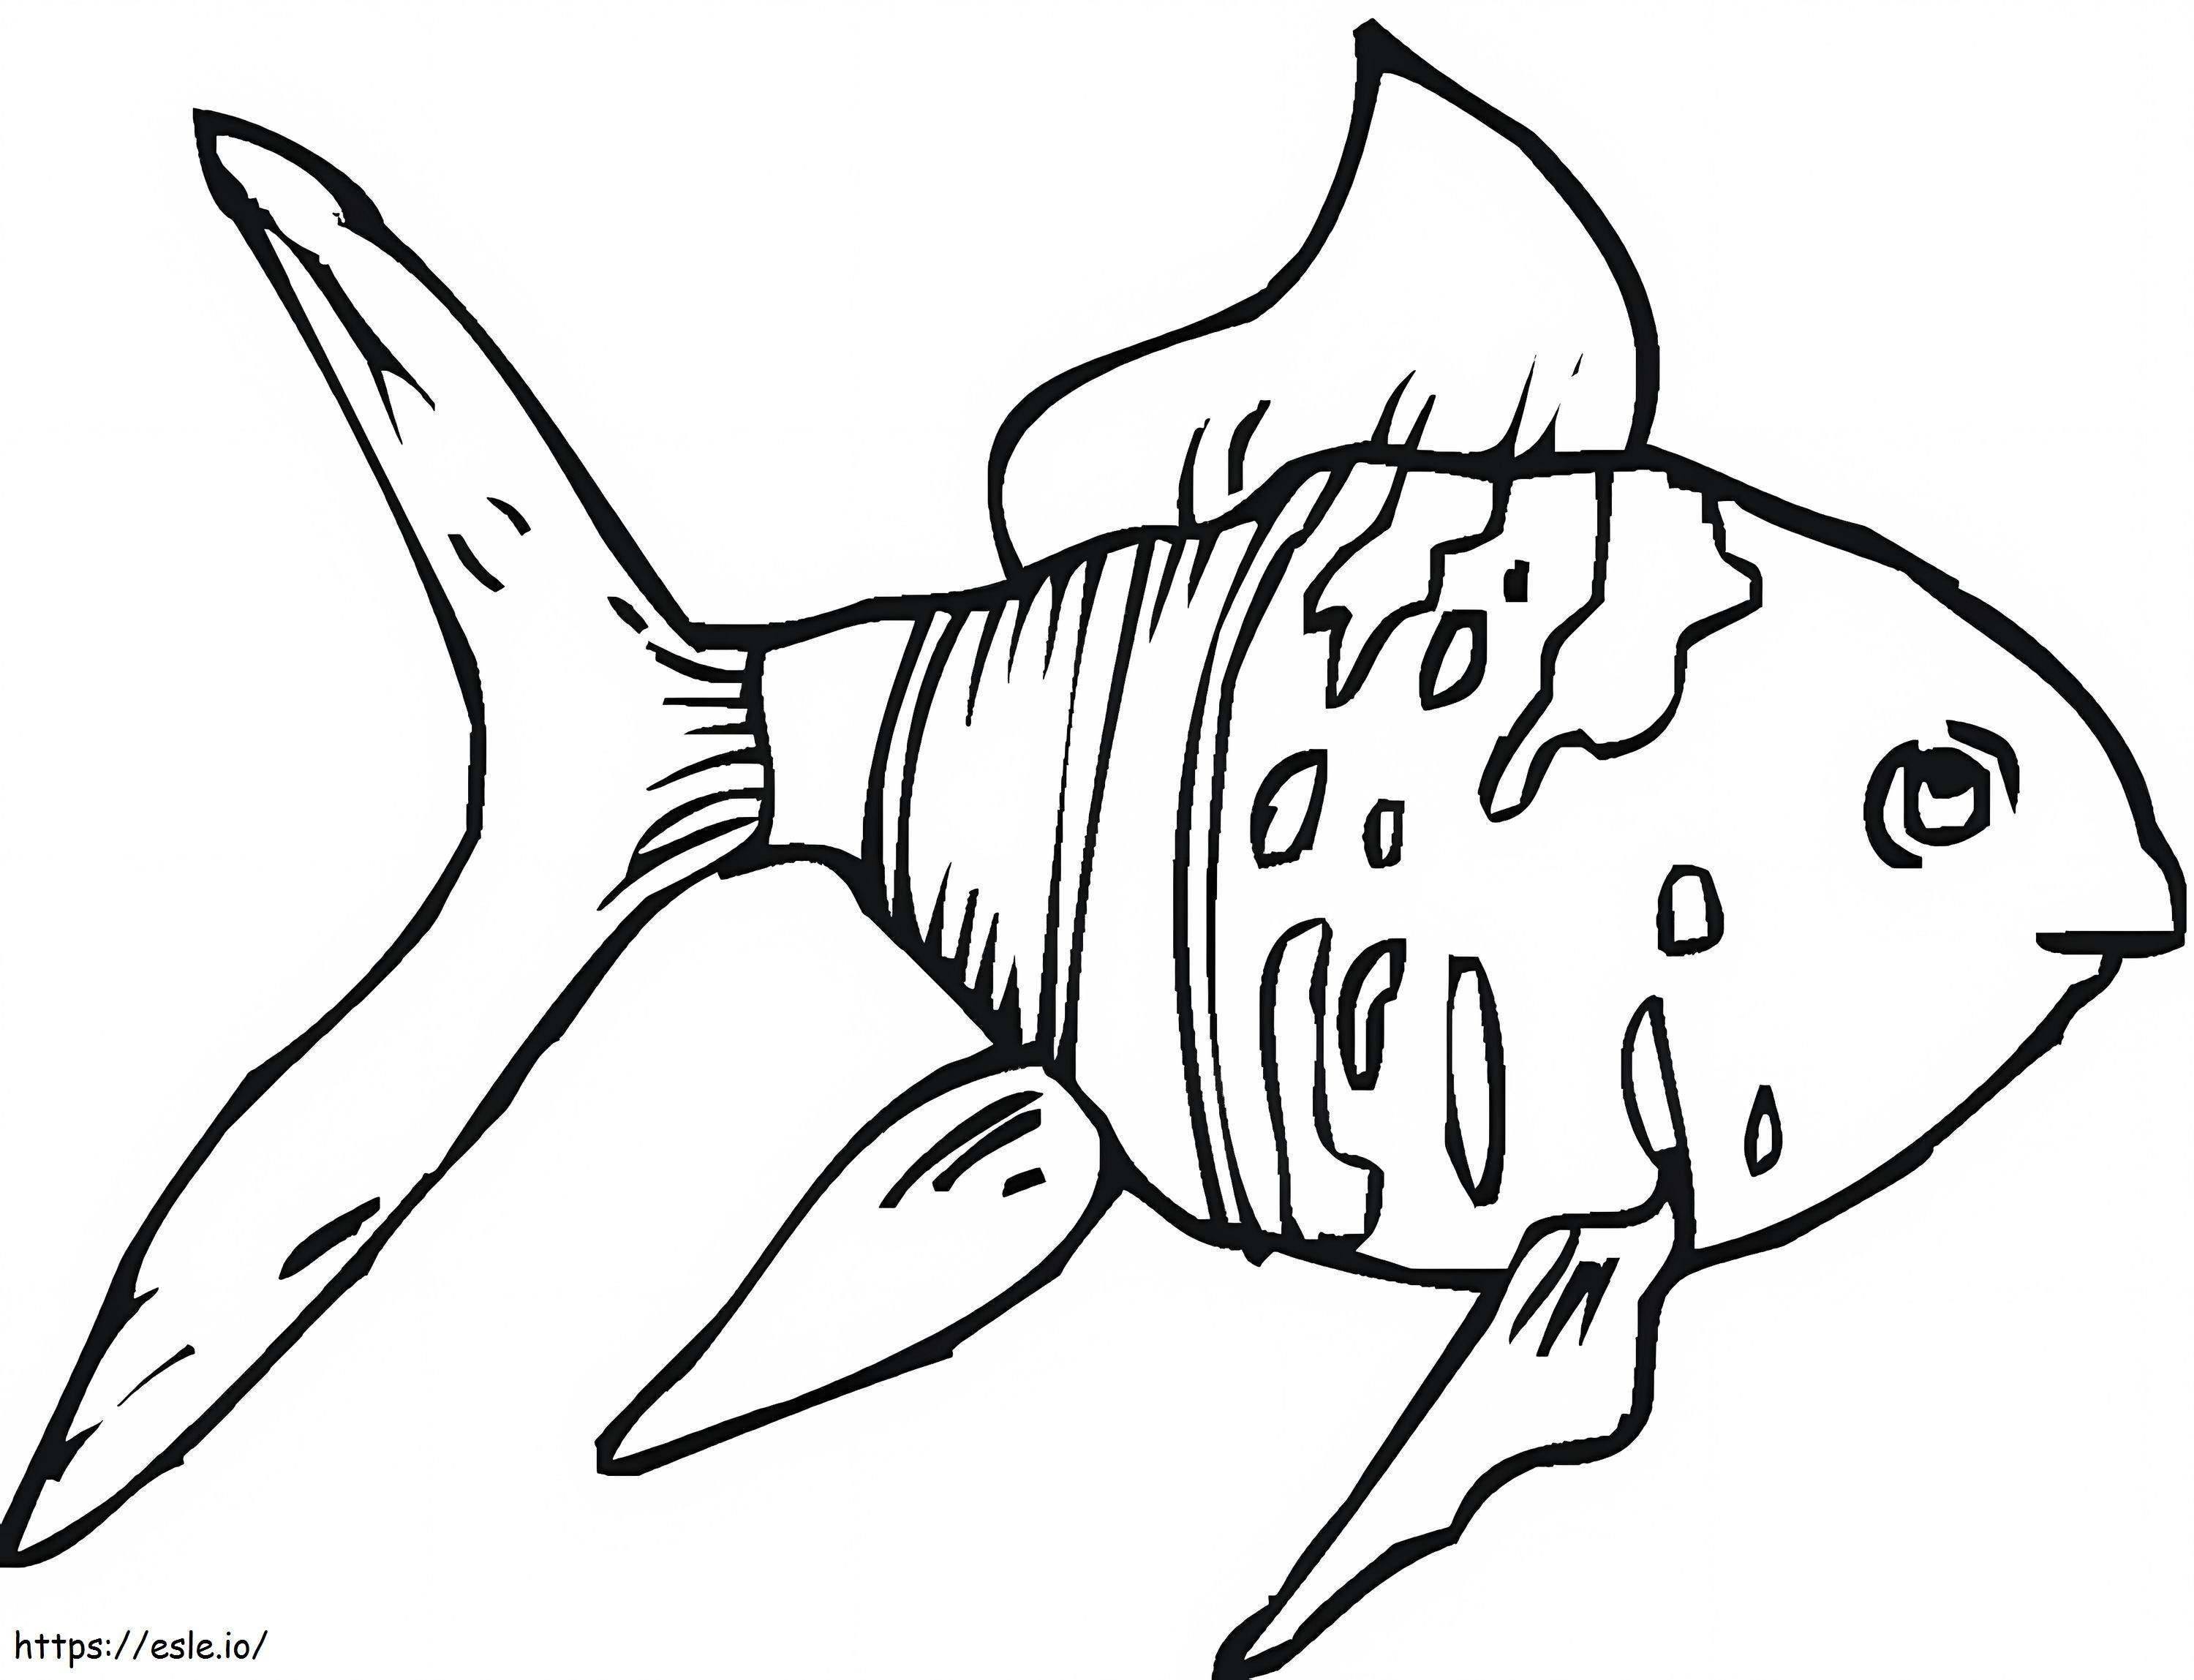 Goldfish 1 coloring page